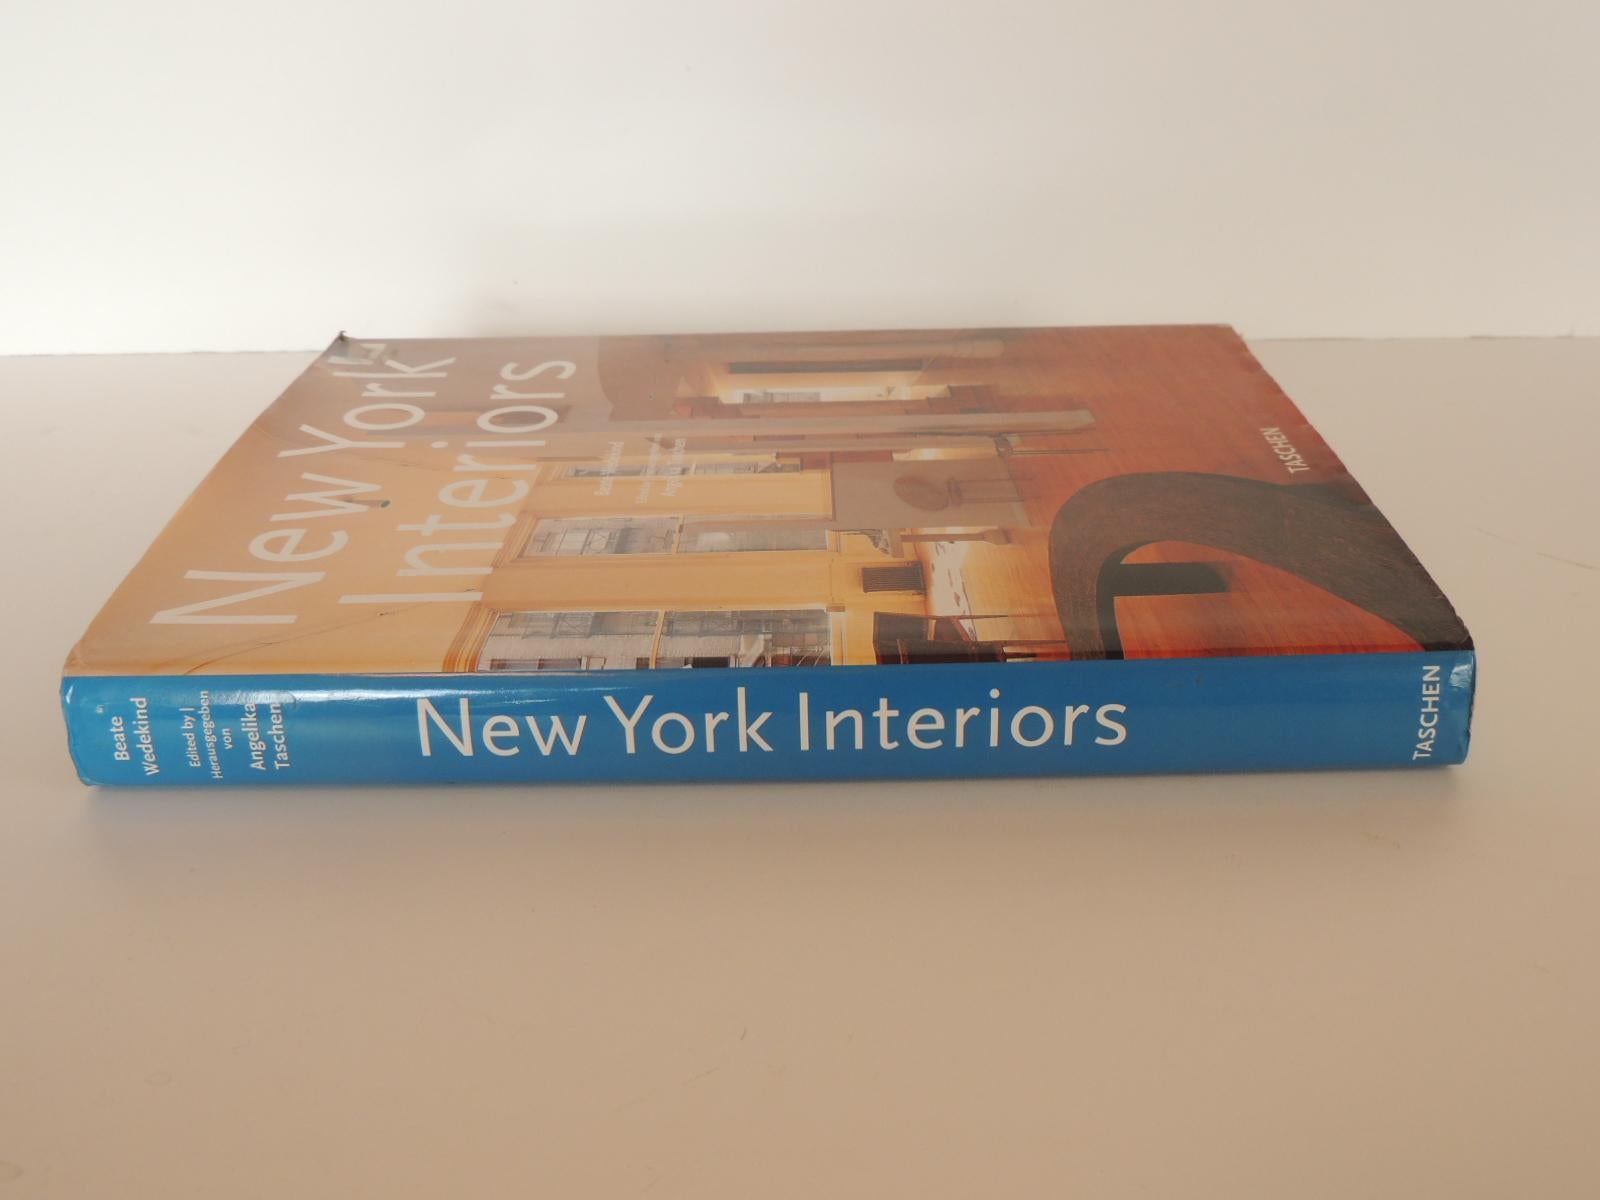 This volume contains a collection of the many fascinating ways in which people have made themselves feel at home in New York. It covers 42 different apartments and houses in Manhattan, Brooklyn and Long Island - from a loft sprayed with graffiti to